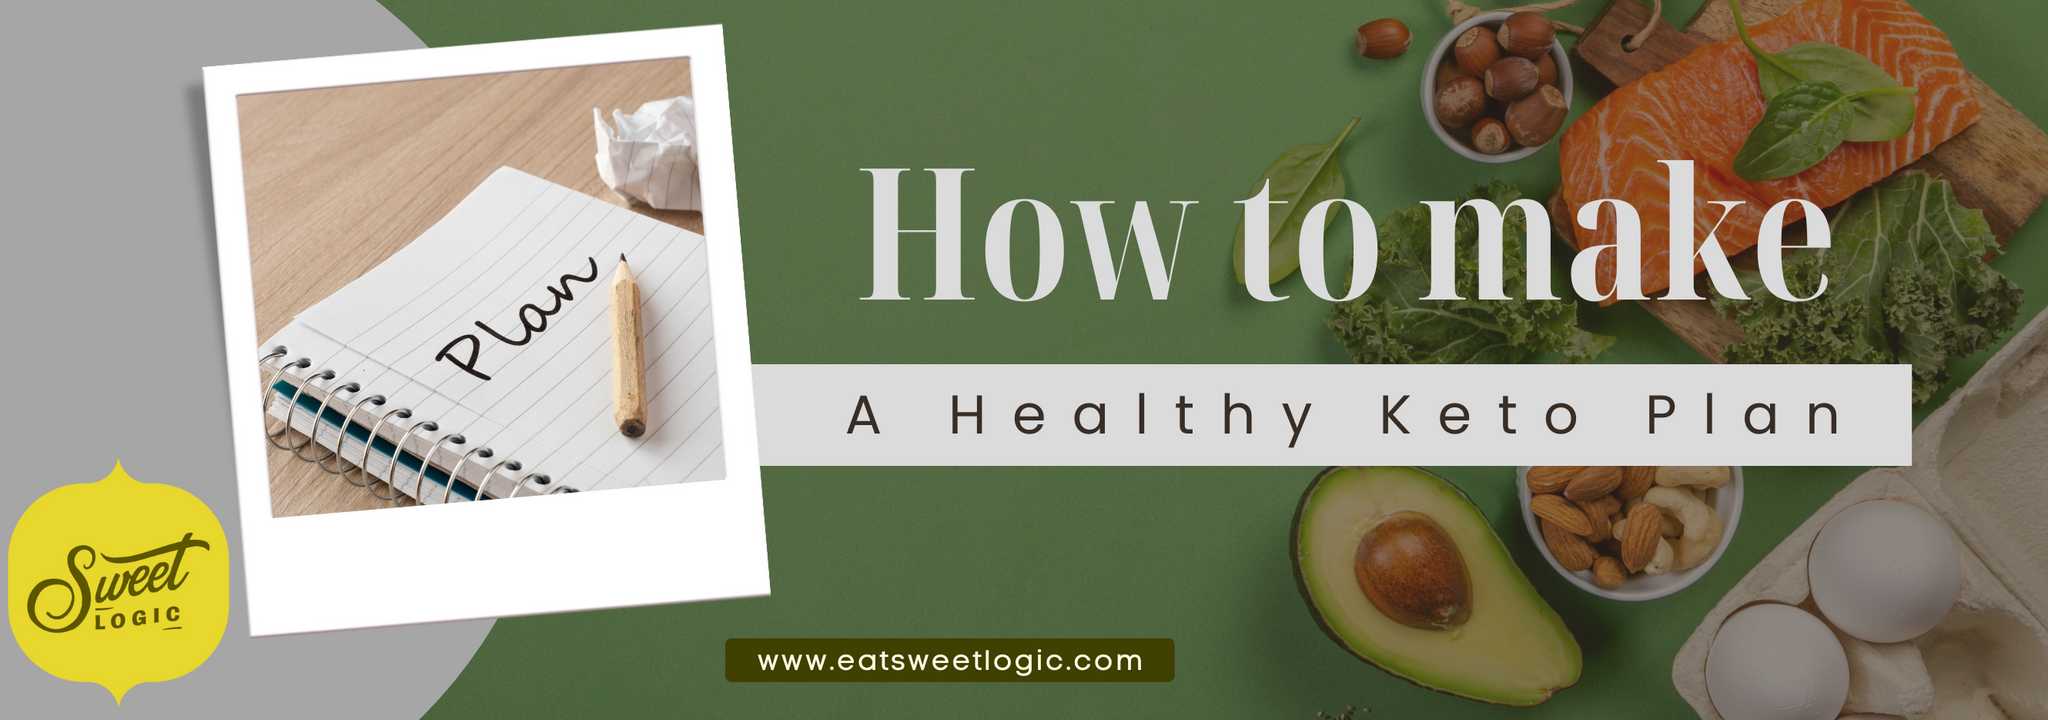 Tips on how to make a healthy keto plan